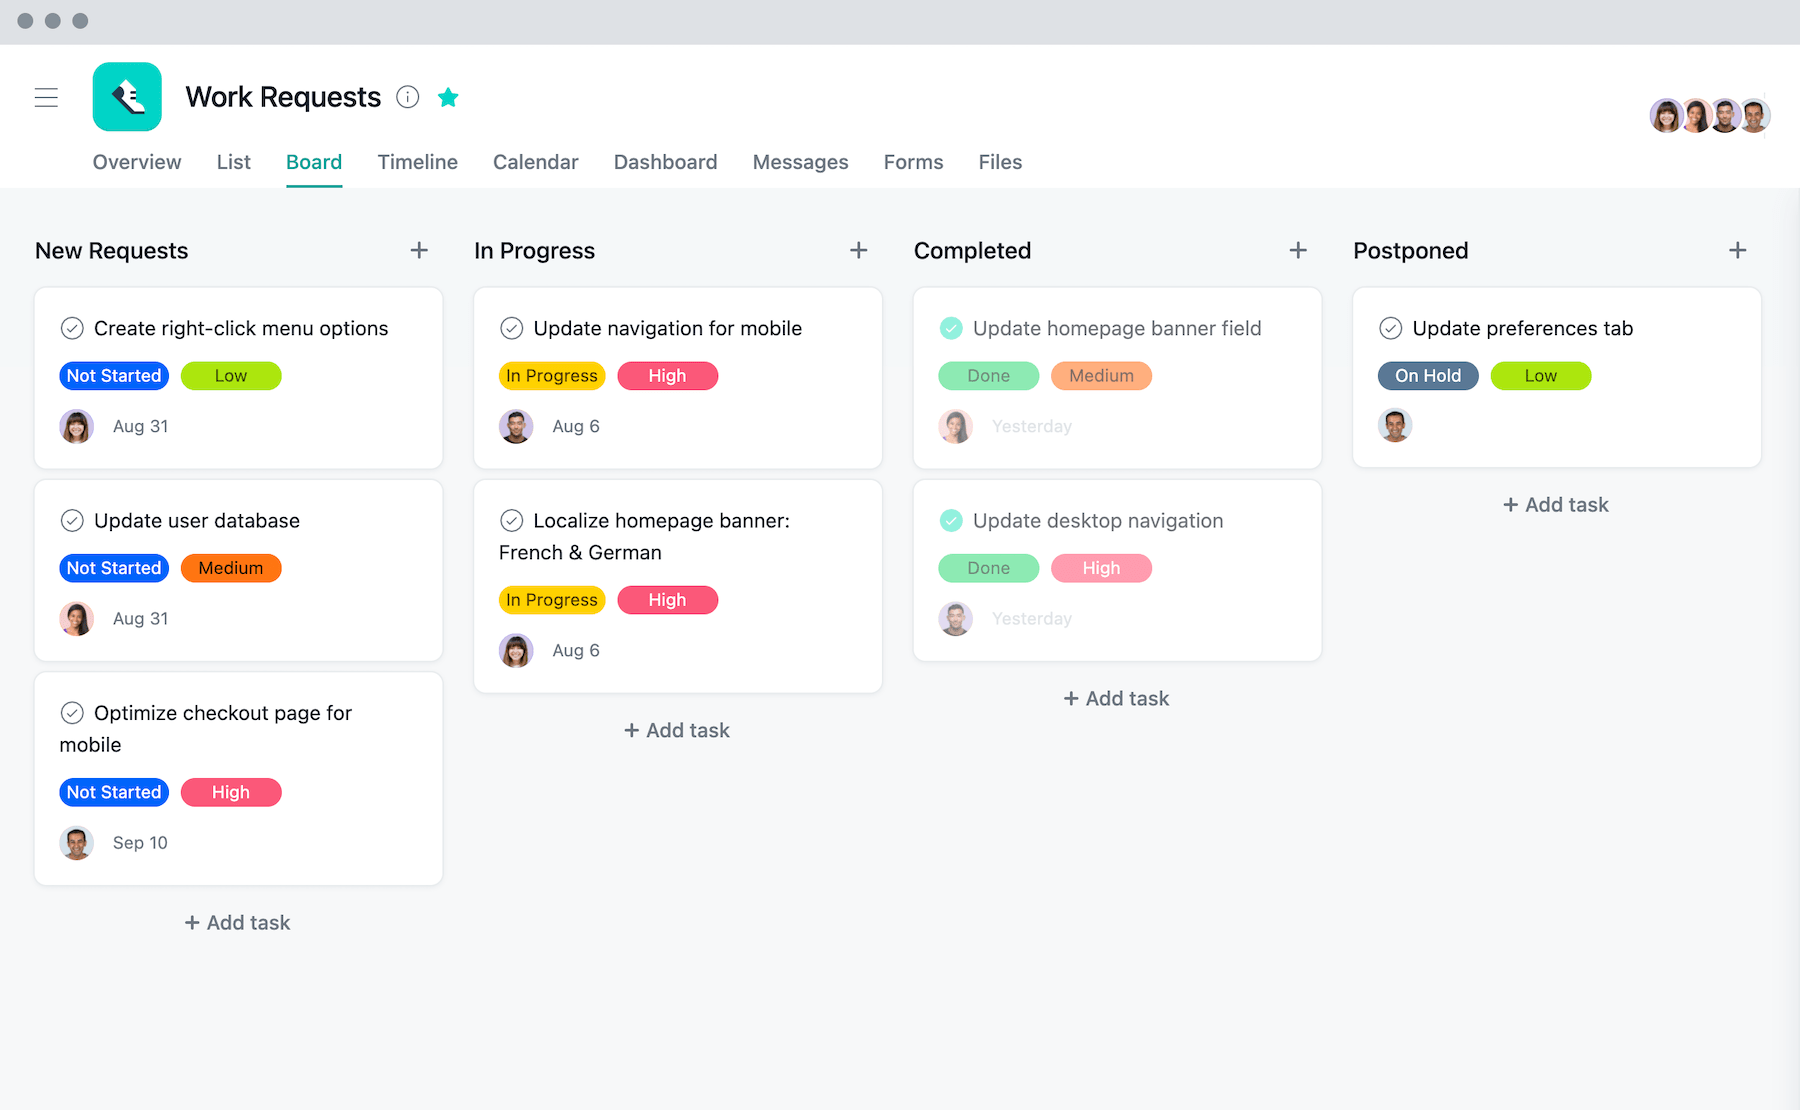 [Product UI] Project plan template - work requests template (Boards)